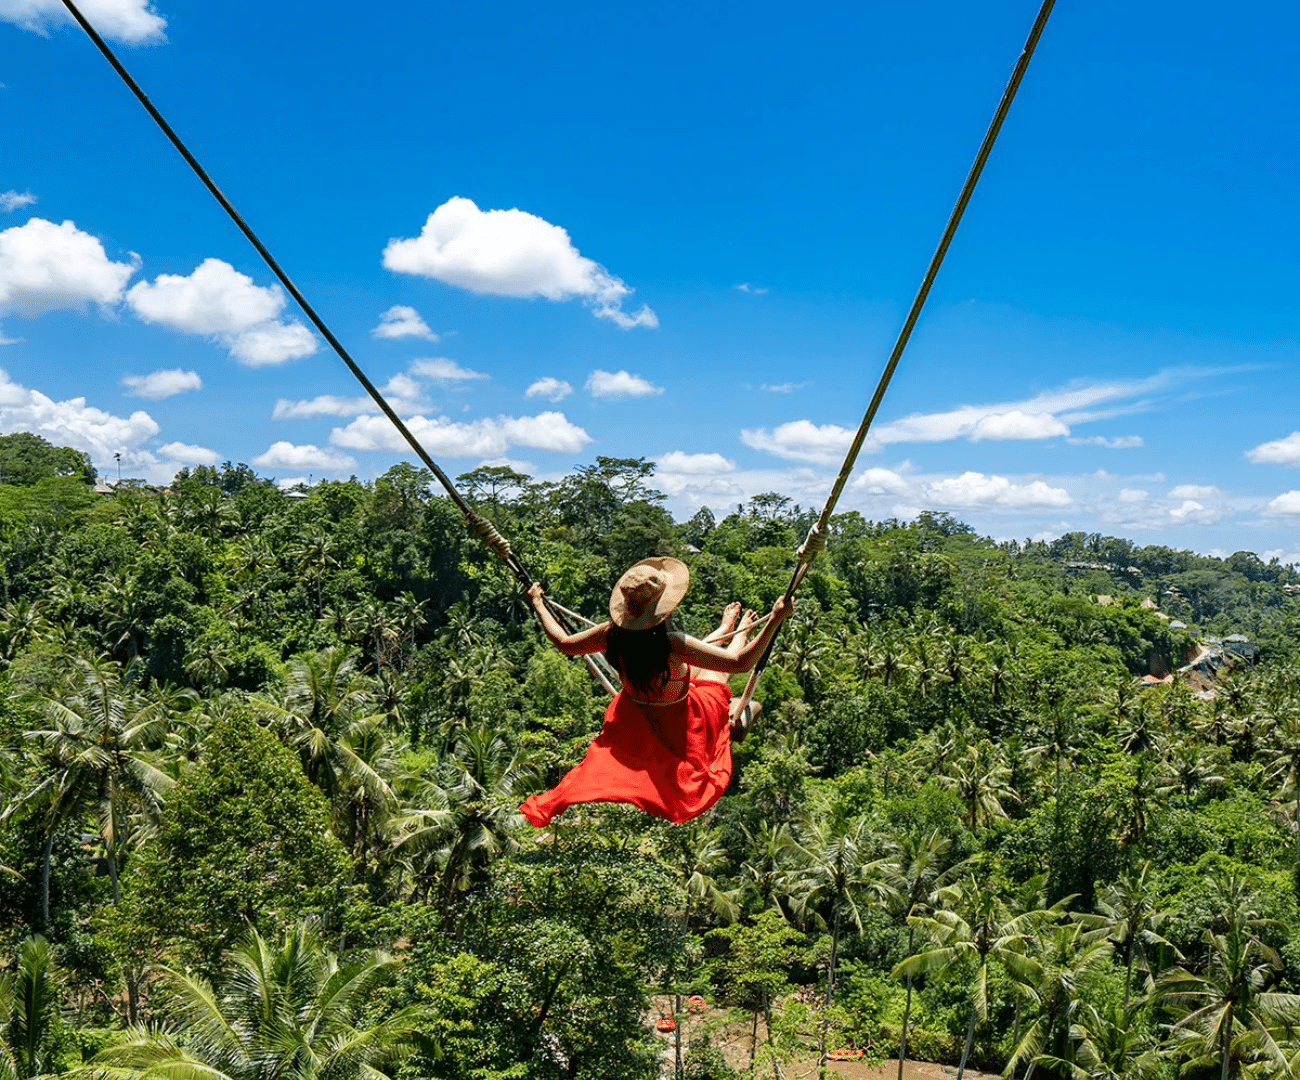 Bali Swing: Bali vacation packages